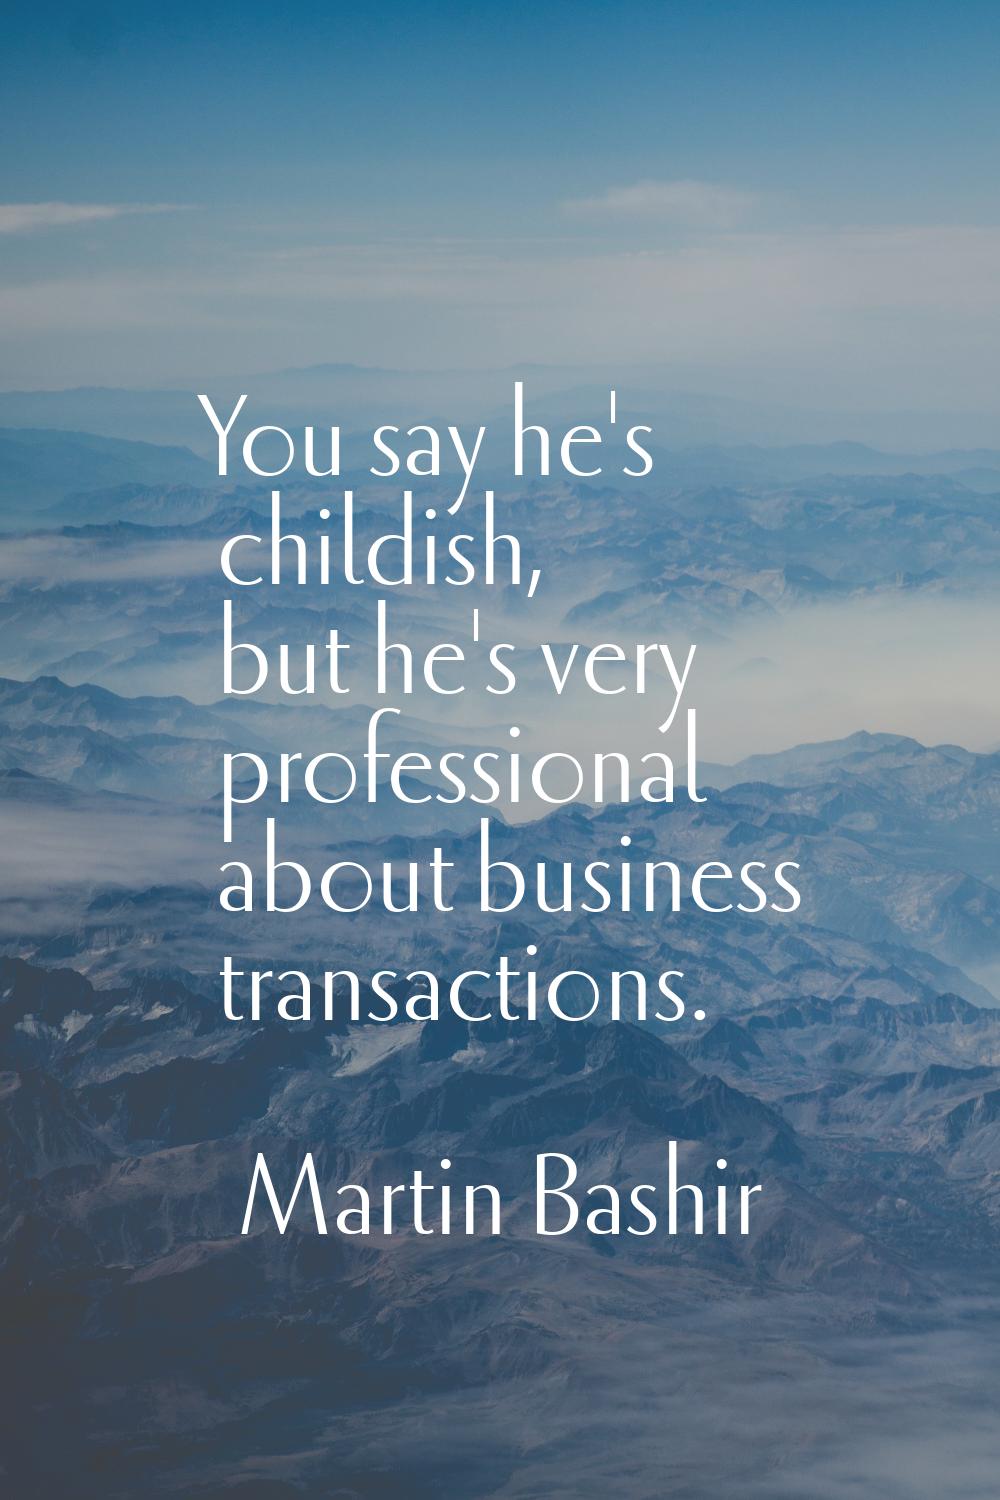 You say he's childish, but he's very professional about business transactions.